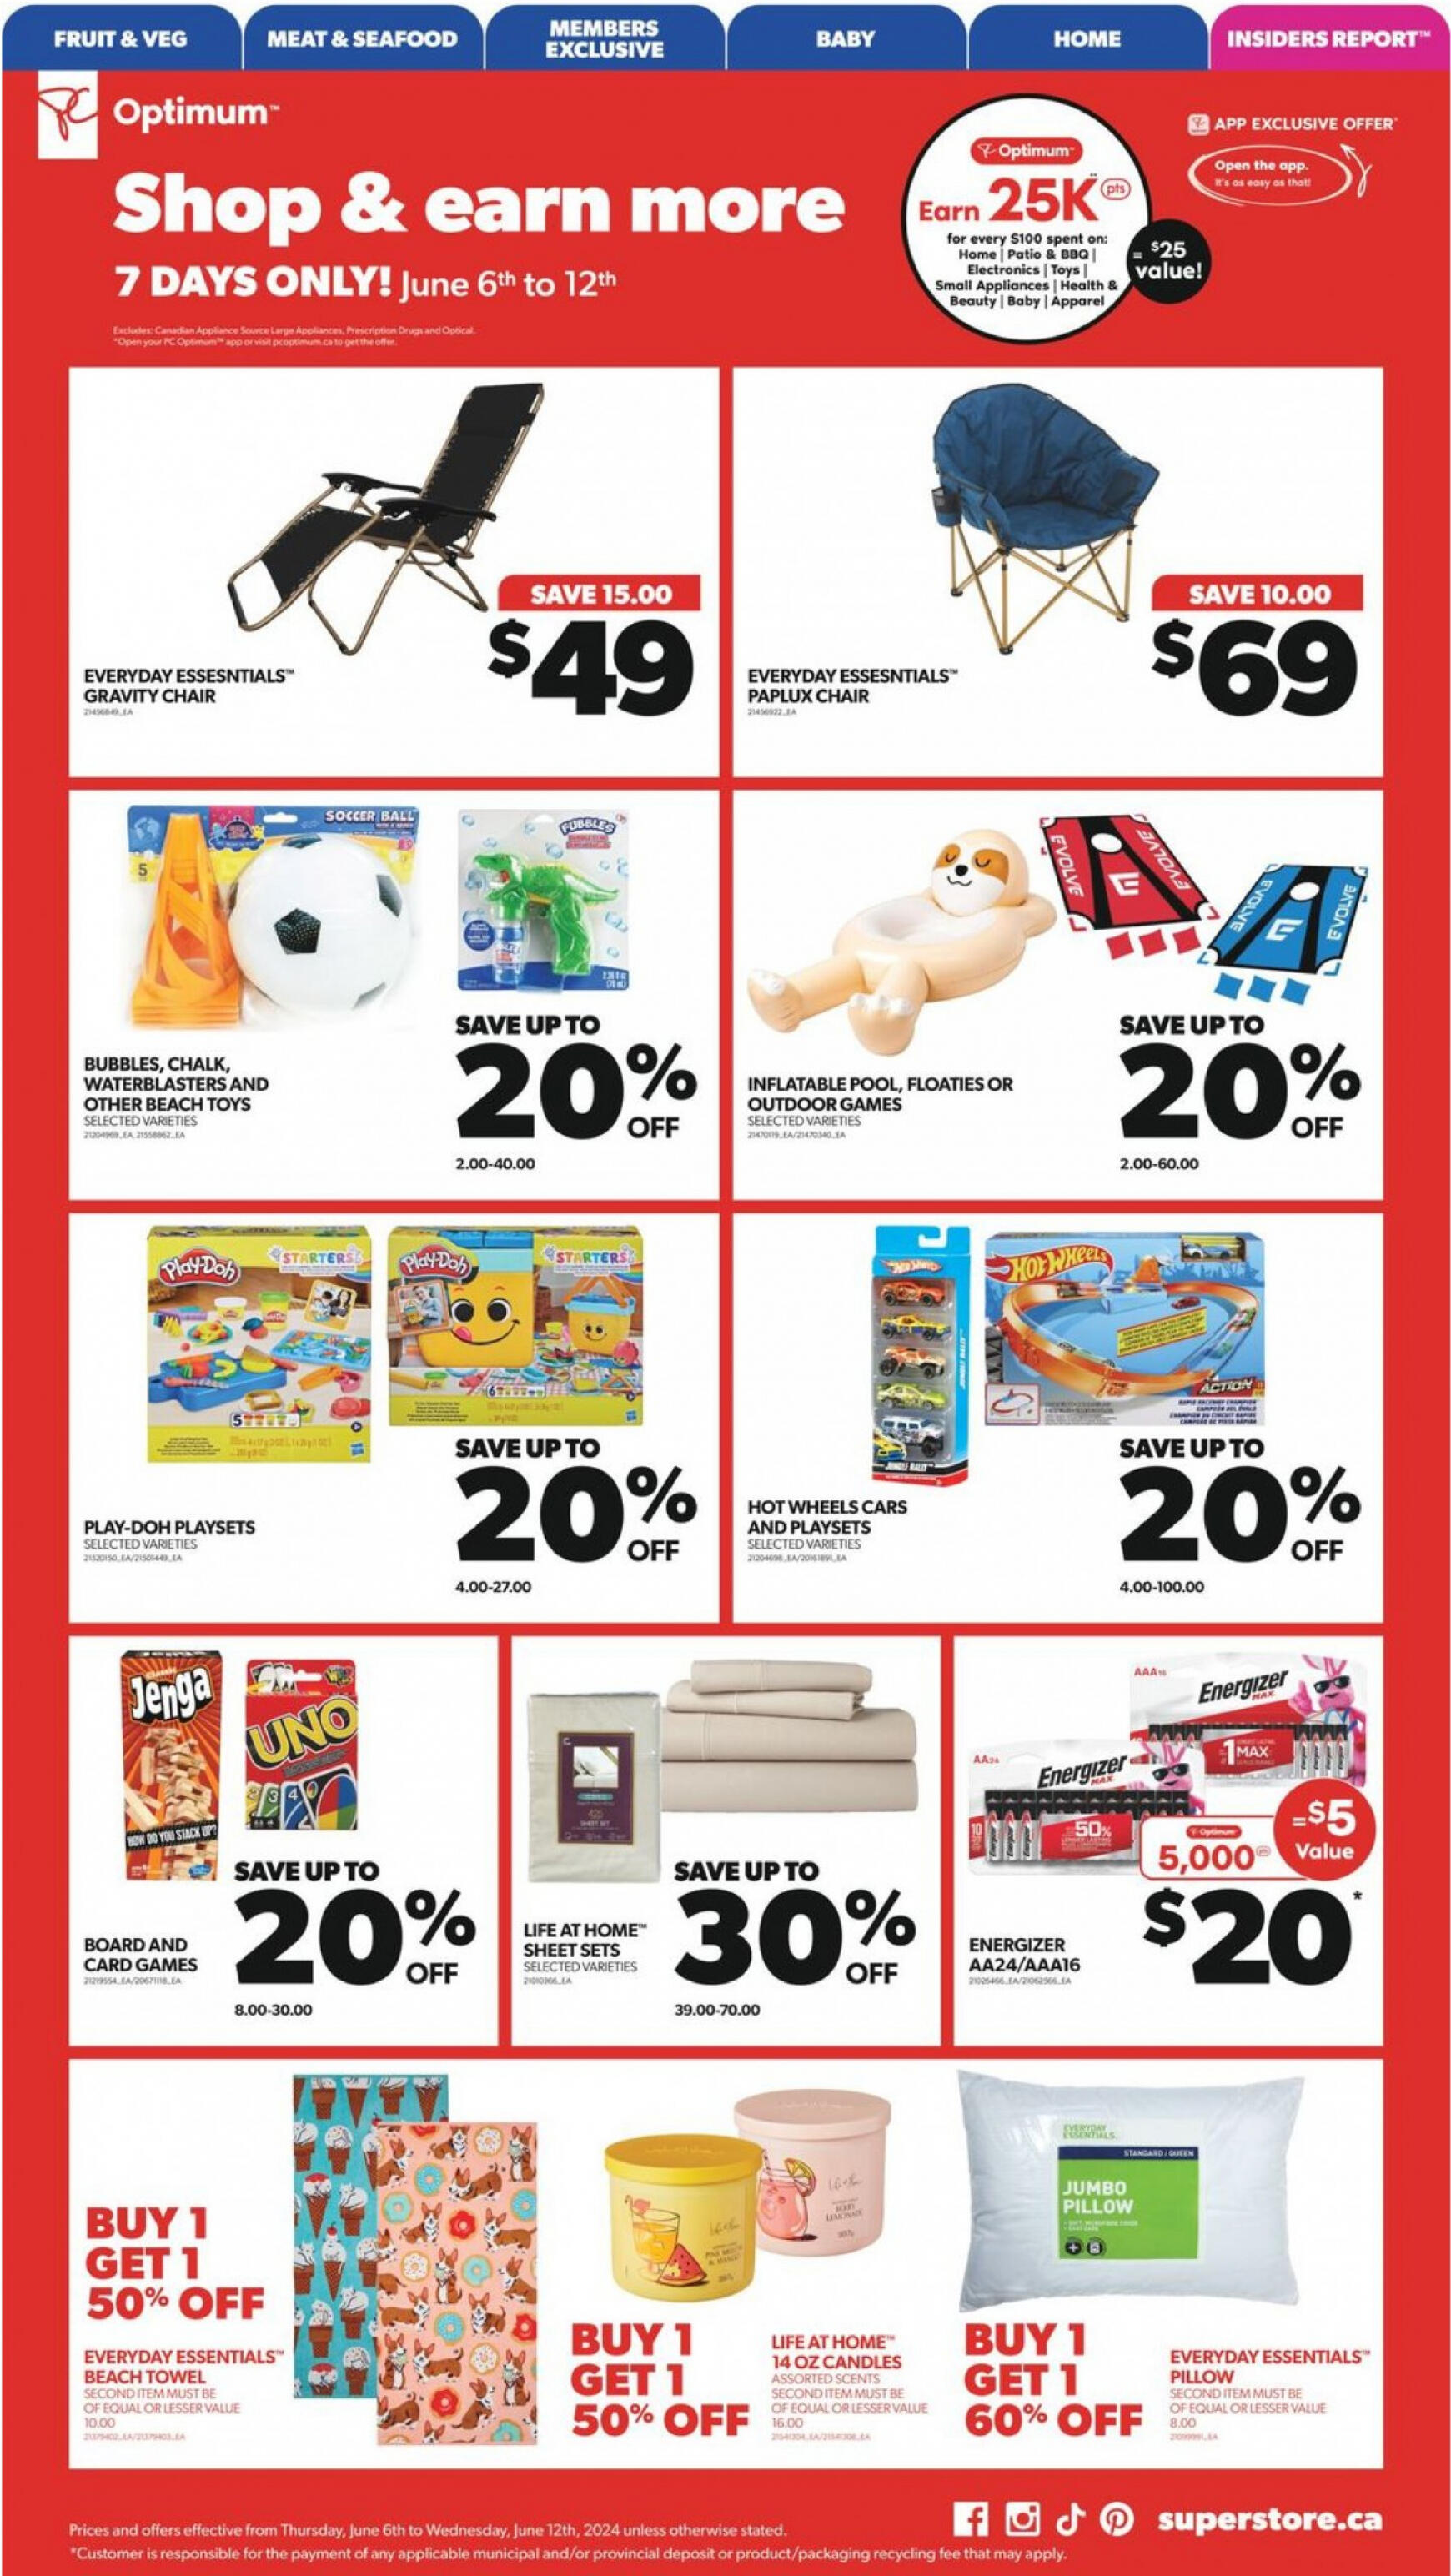 real-canadian-superstore - Real Canadian Superstore flyer current 06.06. - 12.06. - page: 24